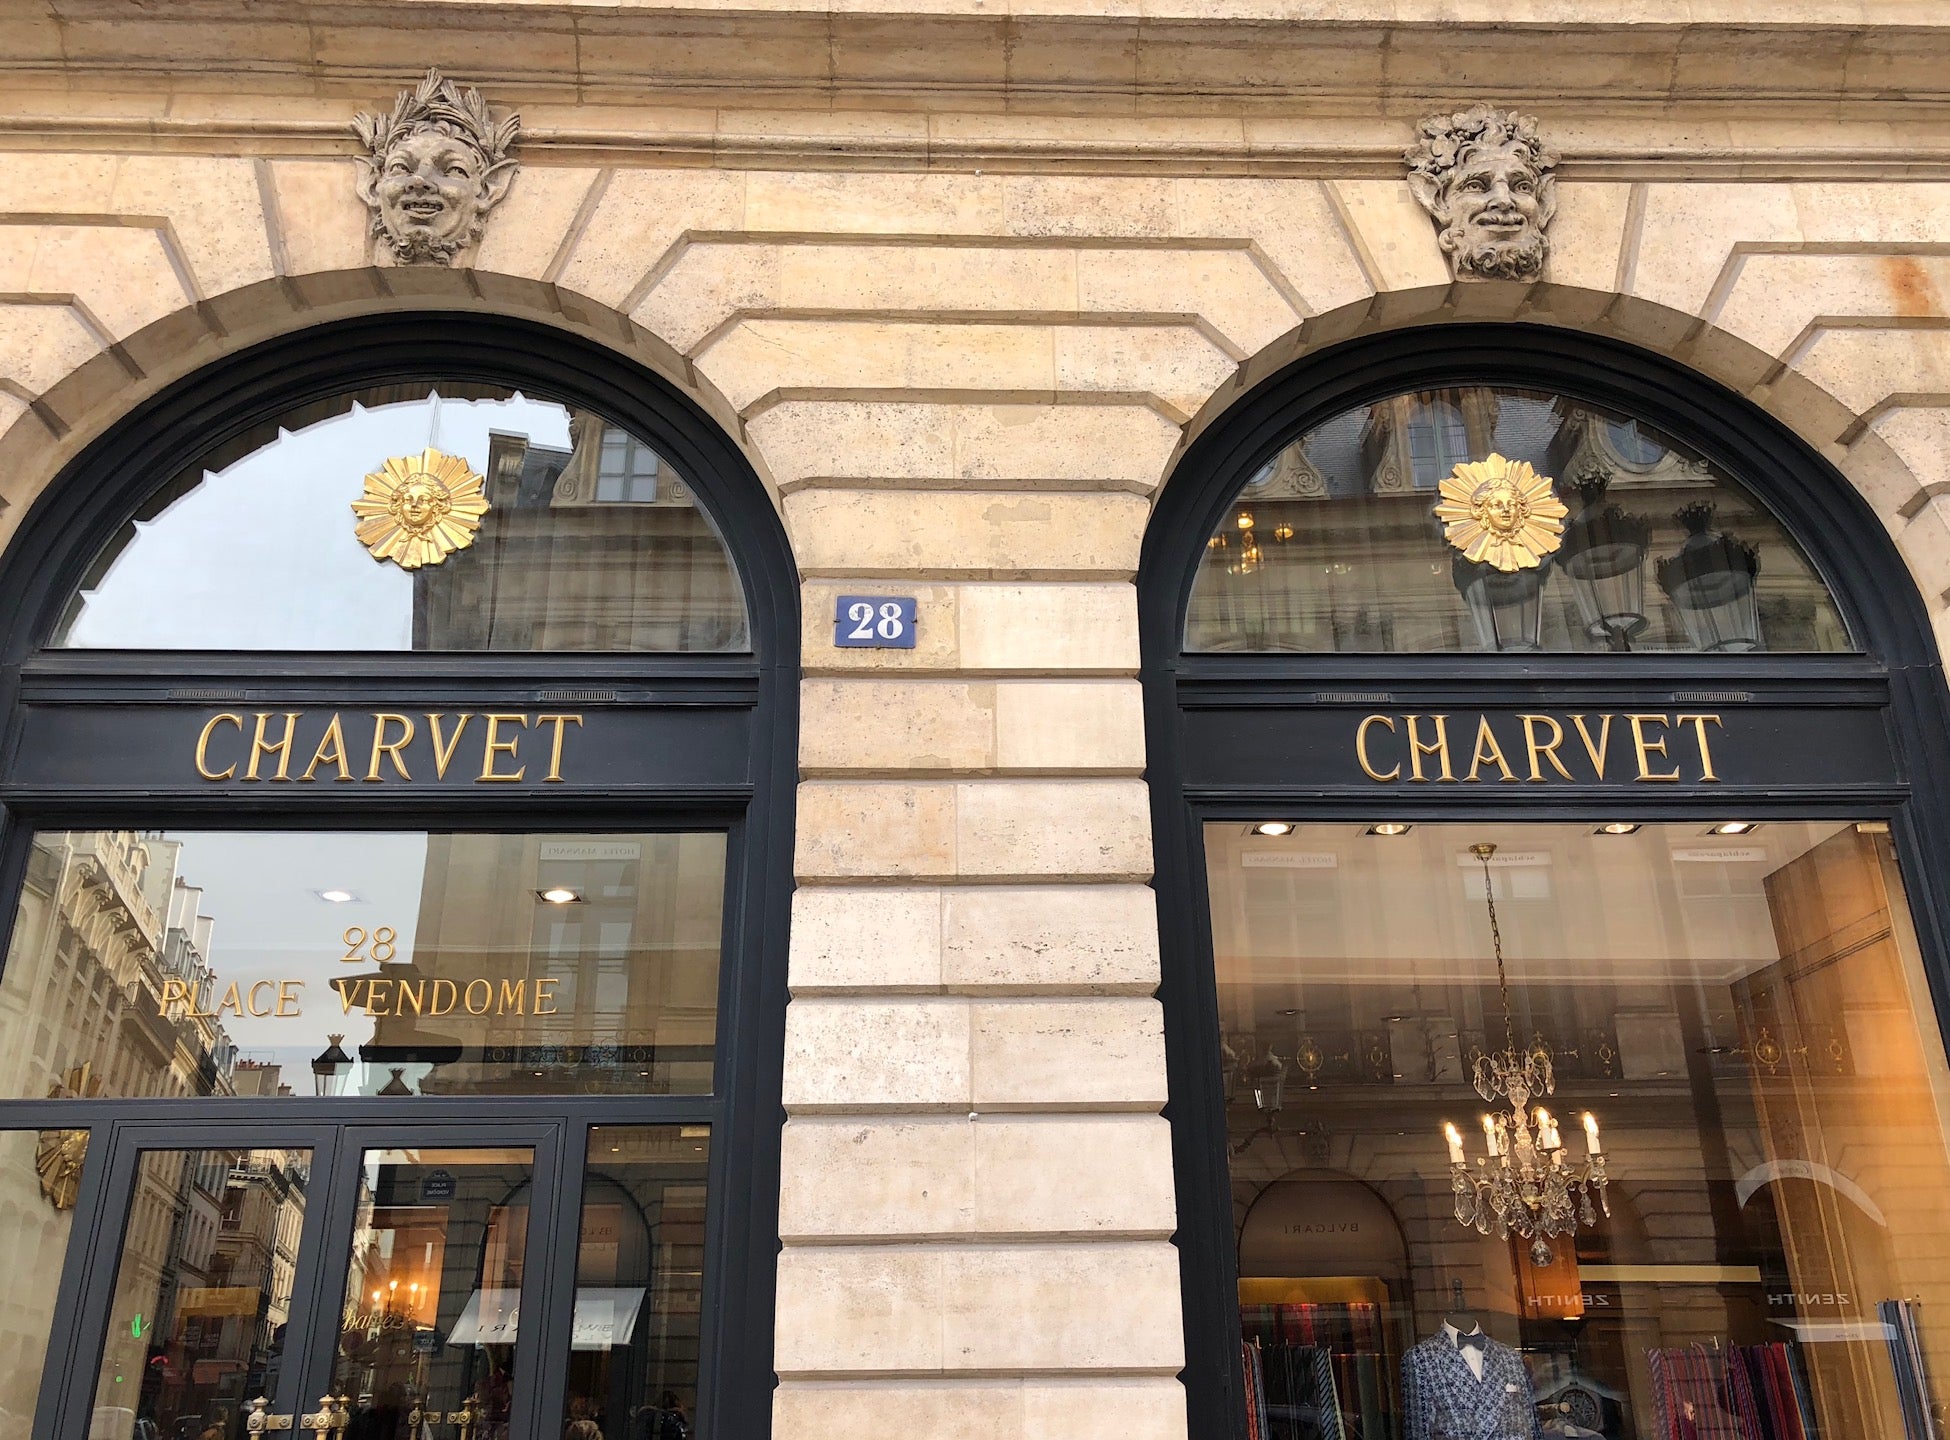 The best shopping in Paris: 10 traditional shops where you can buy